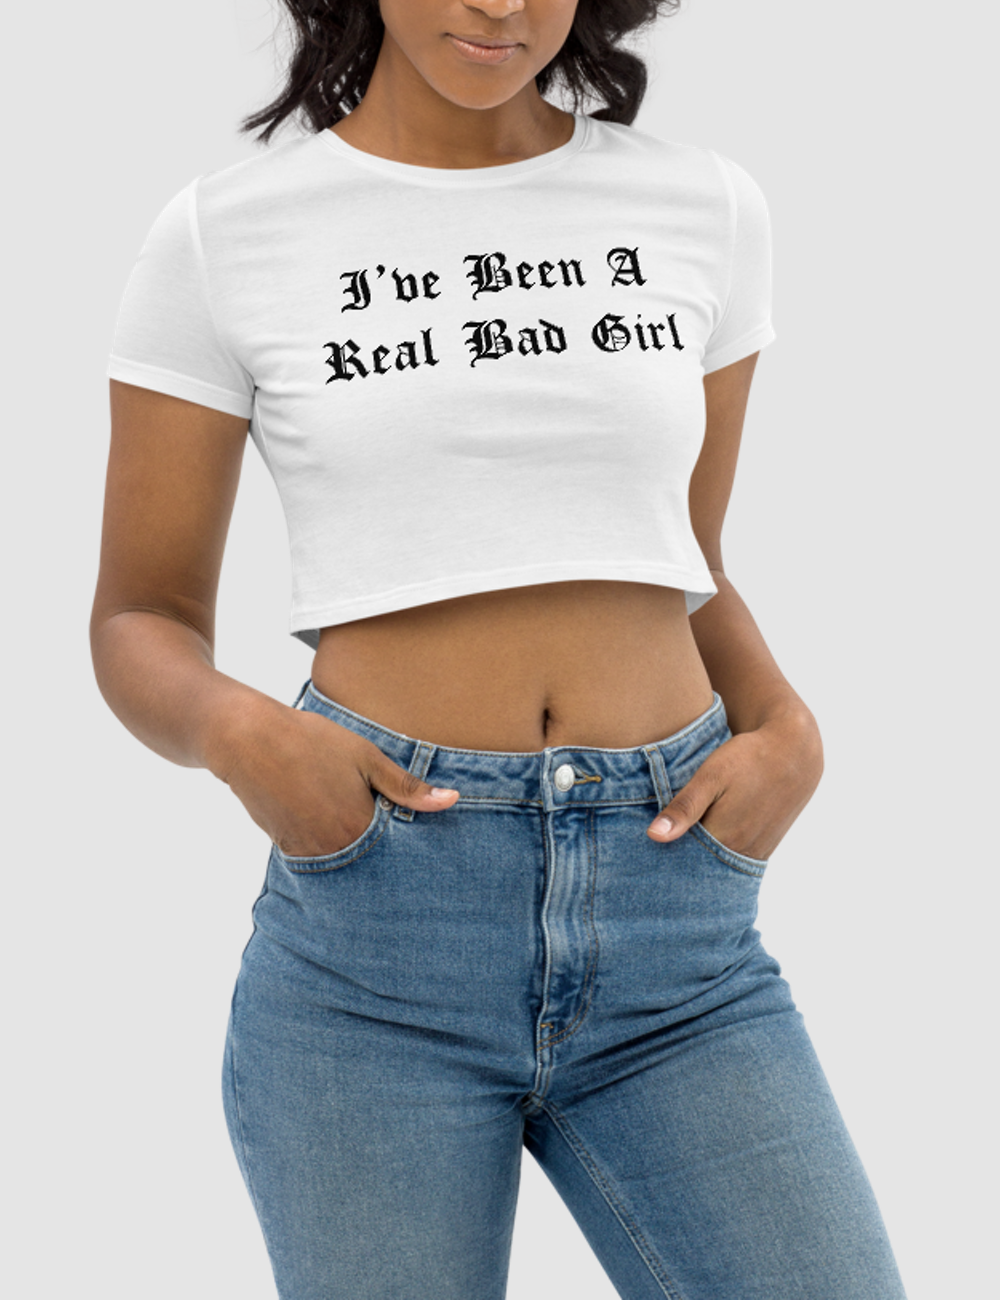 I've Been A Real Bad Girl Women's Fitted Crop Top T-Shirt OniTakai